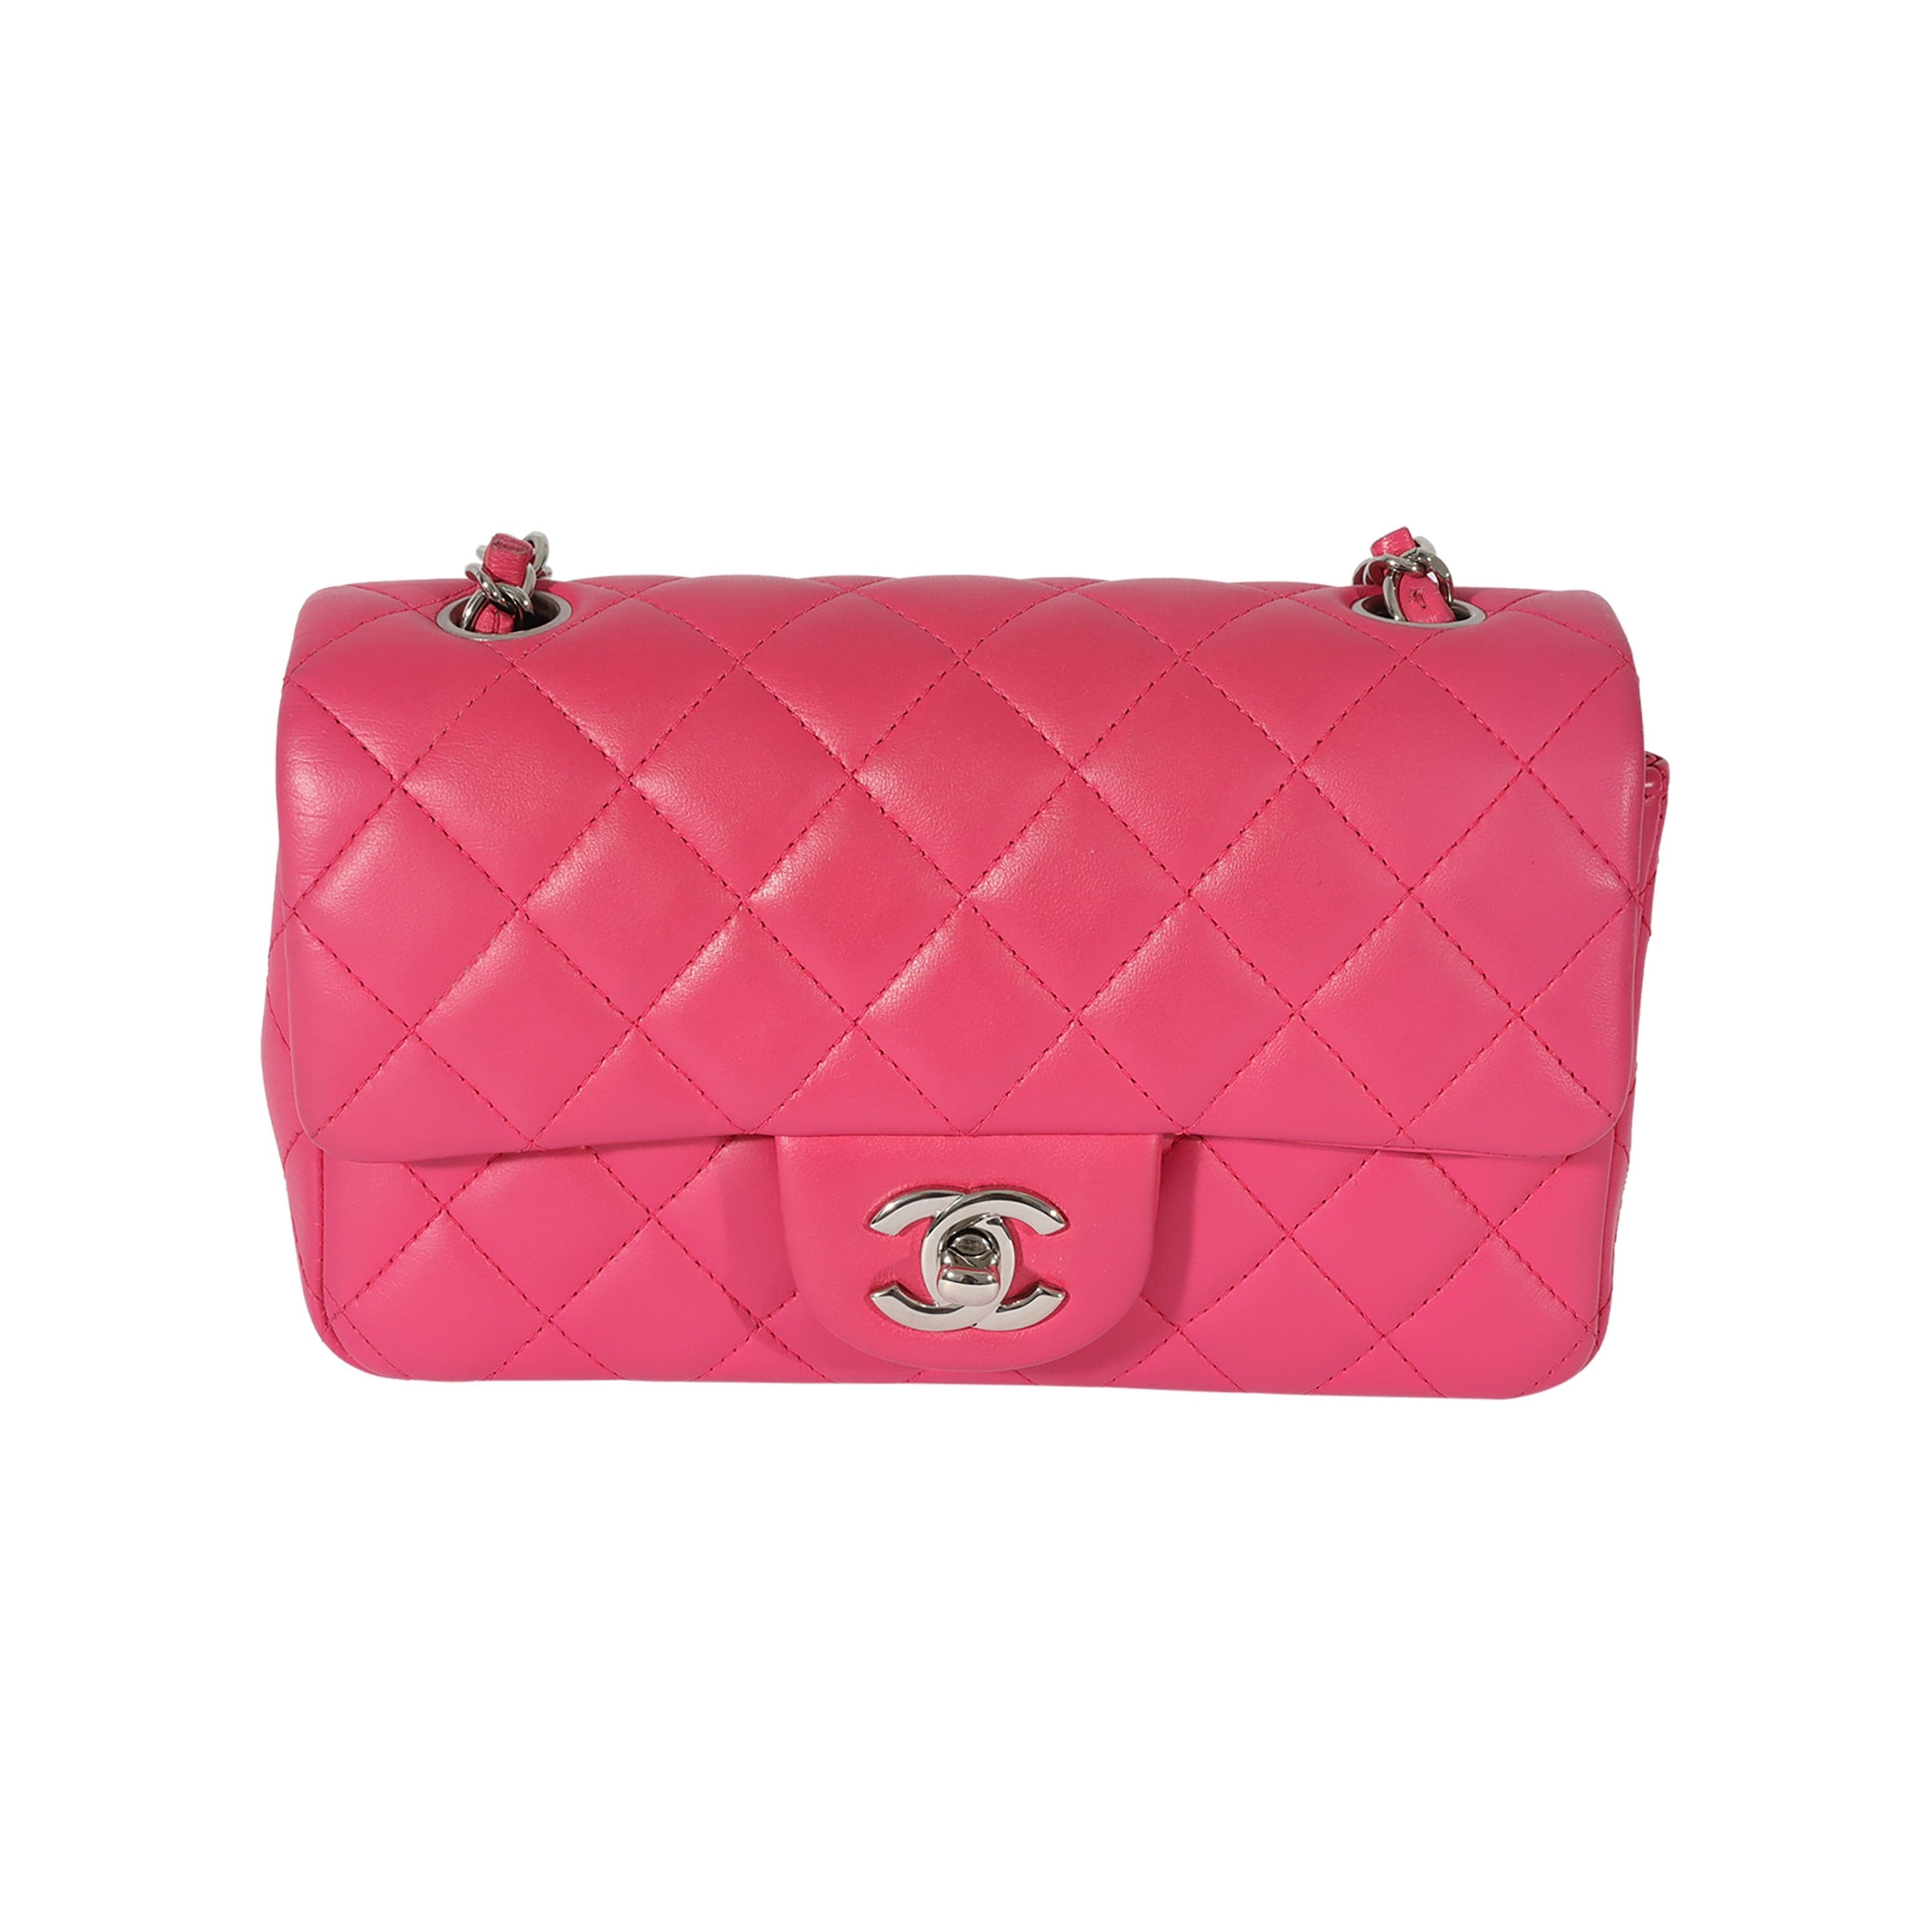 Chanel Pink Quilted Lambskin Mini Rectangular Classic Flap Bag ...